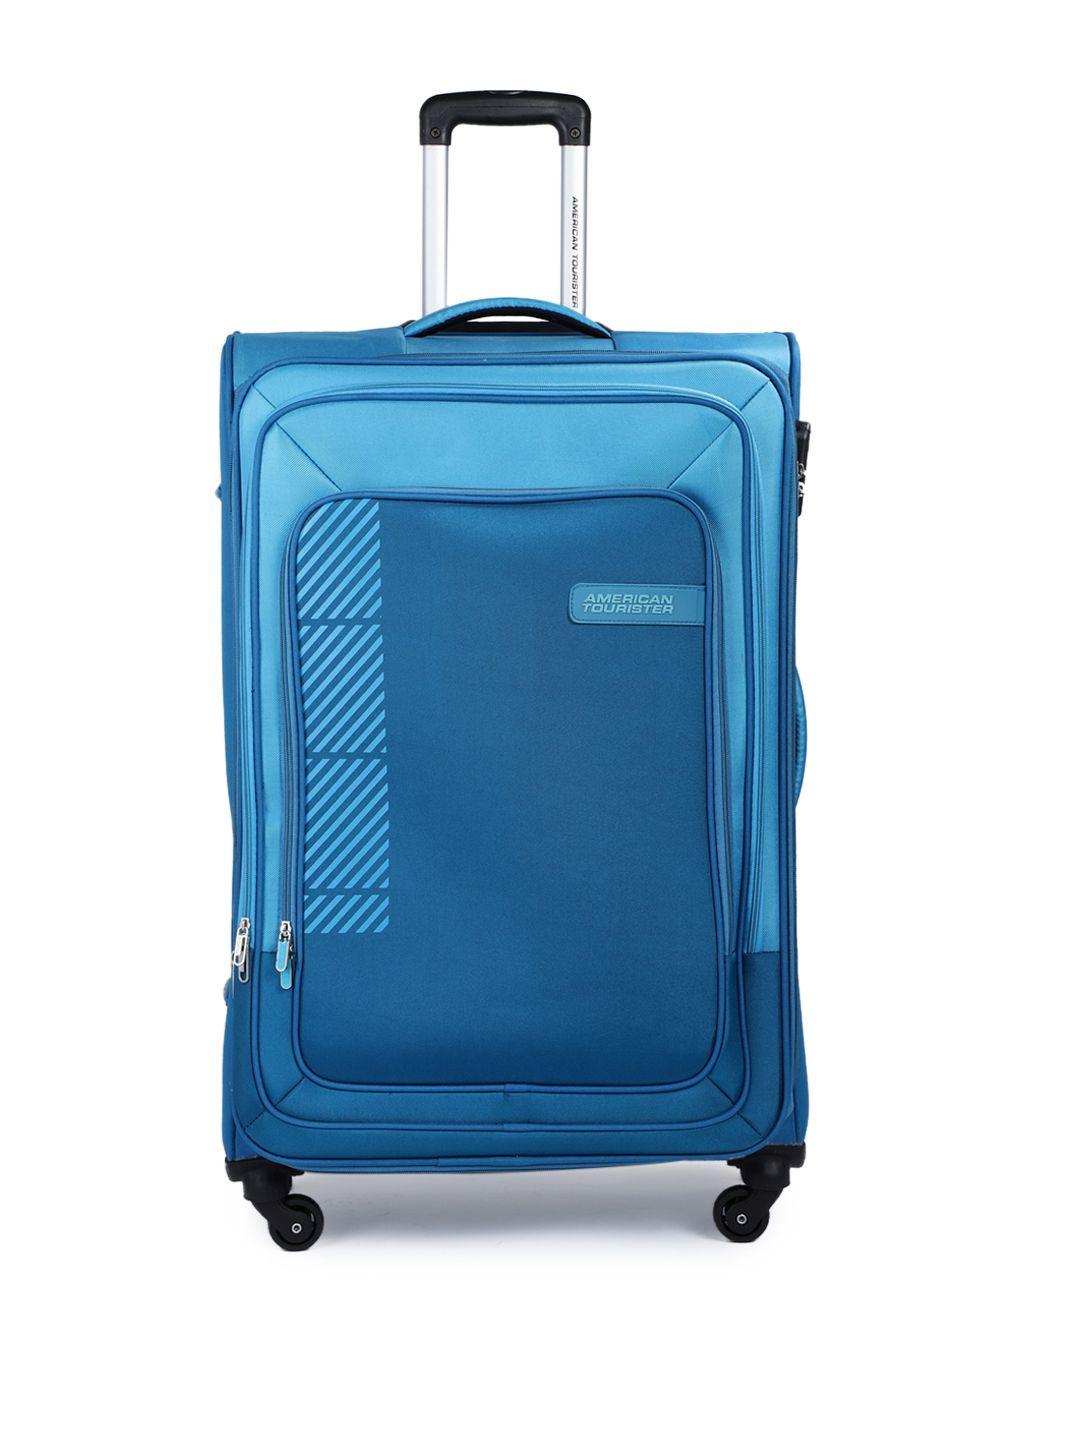 american tourister apolo 81 large trolley suitcase